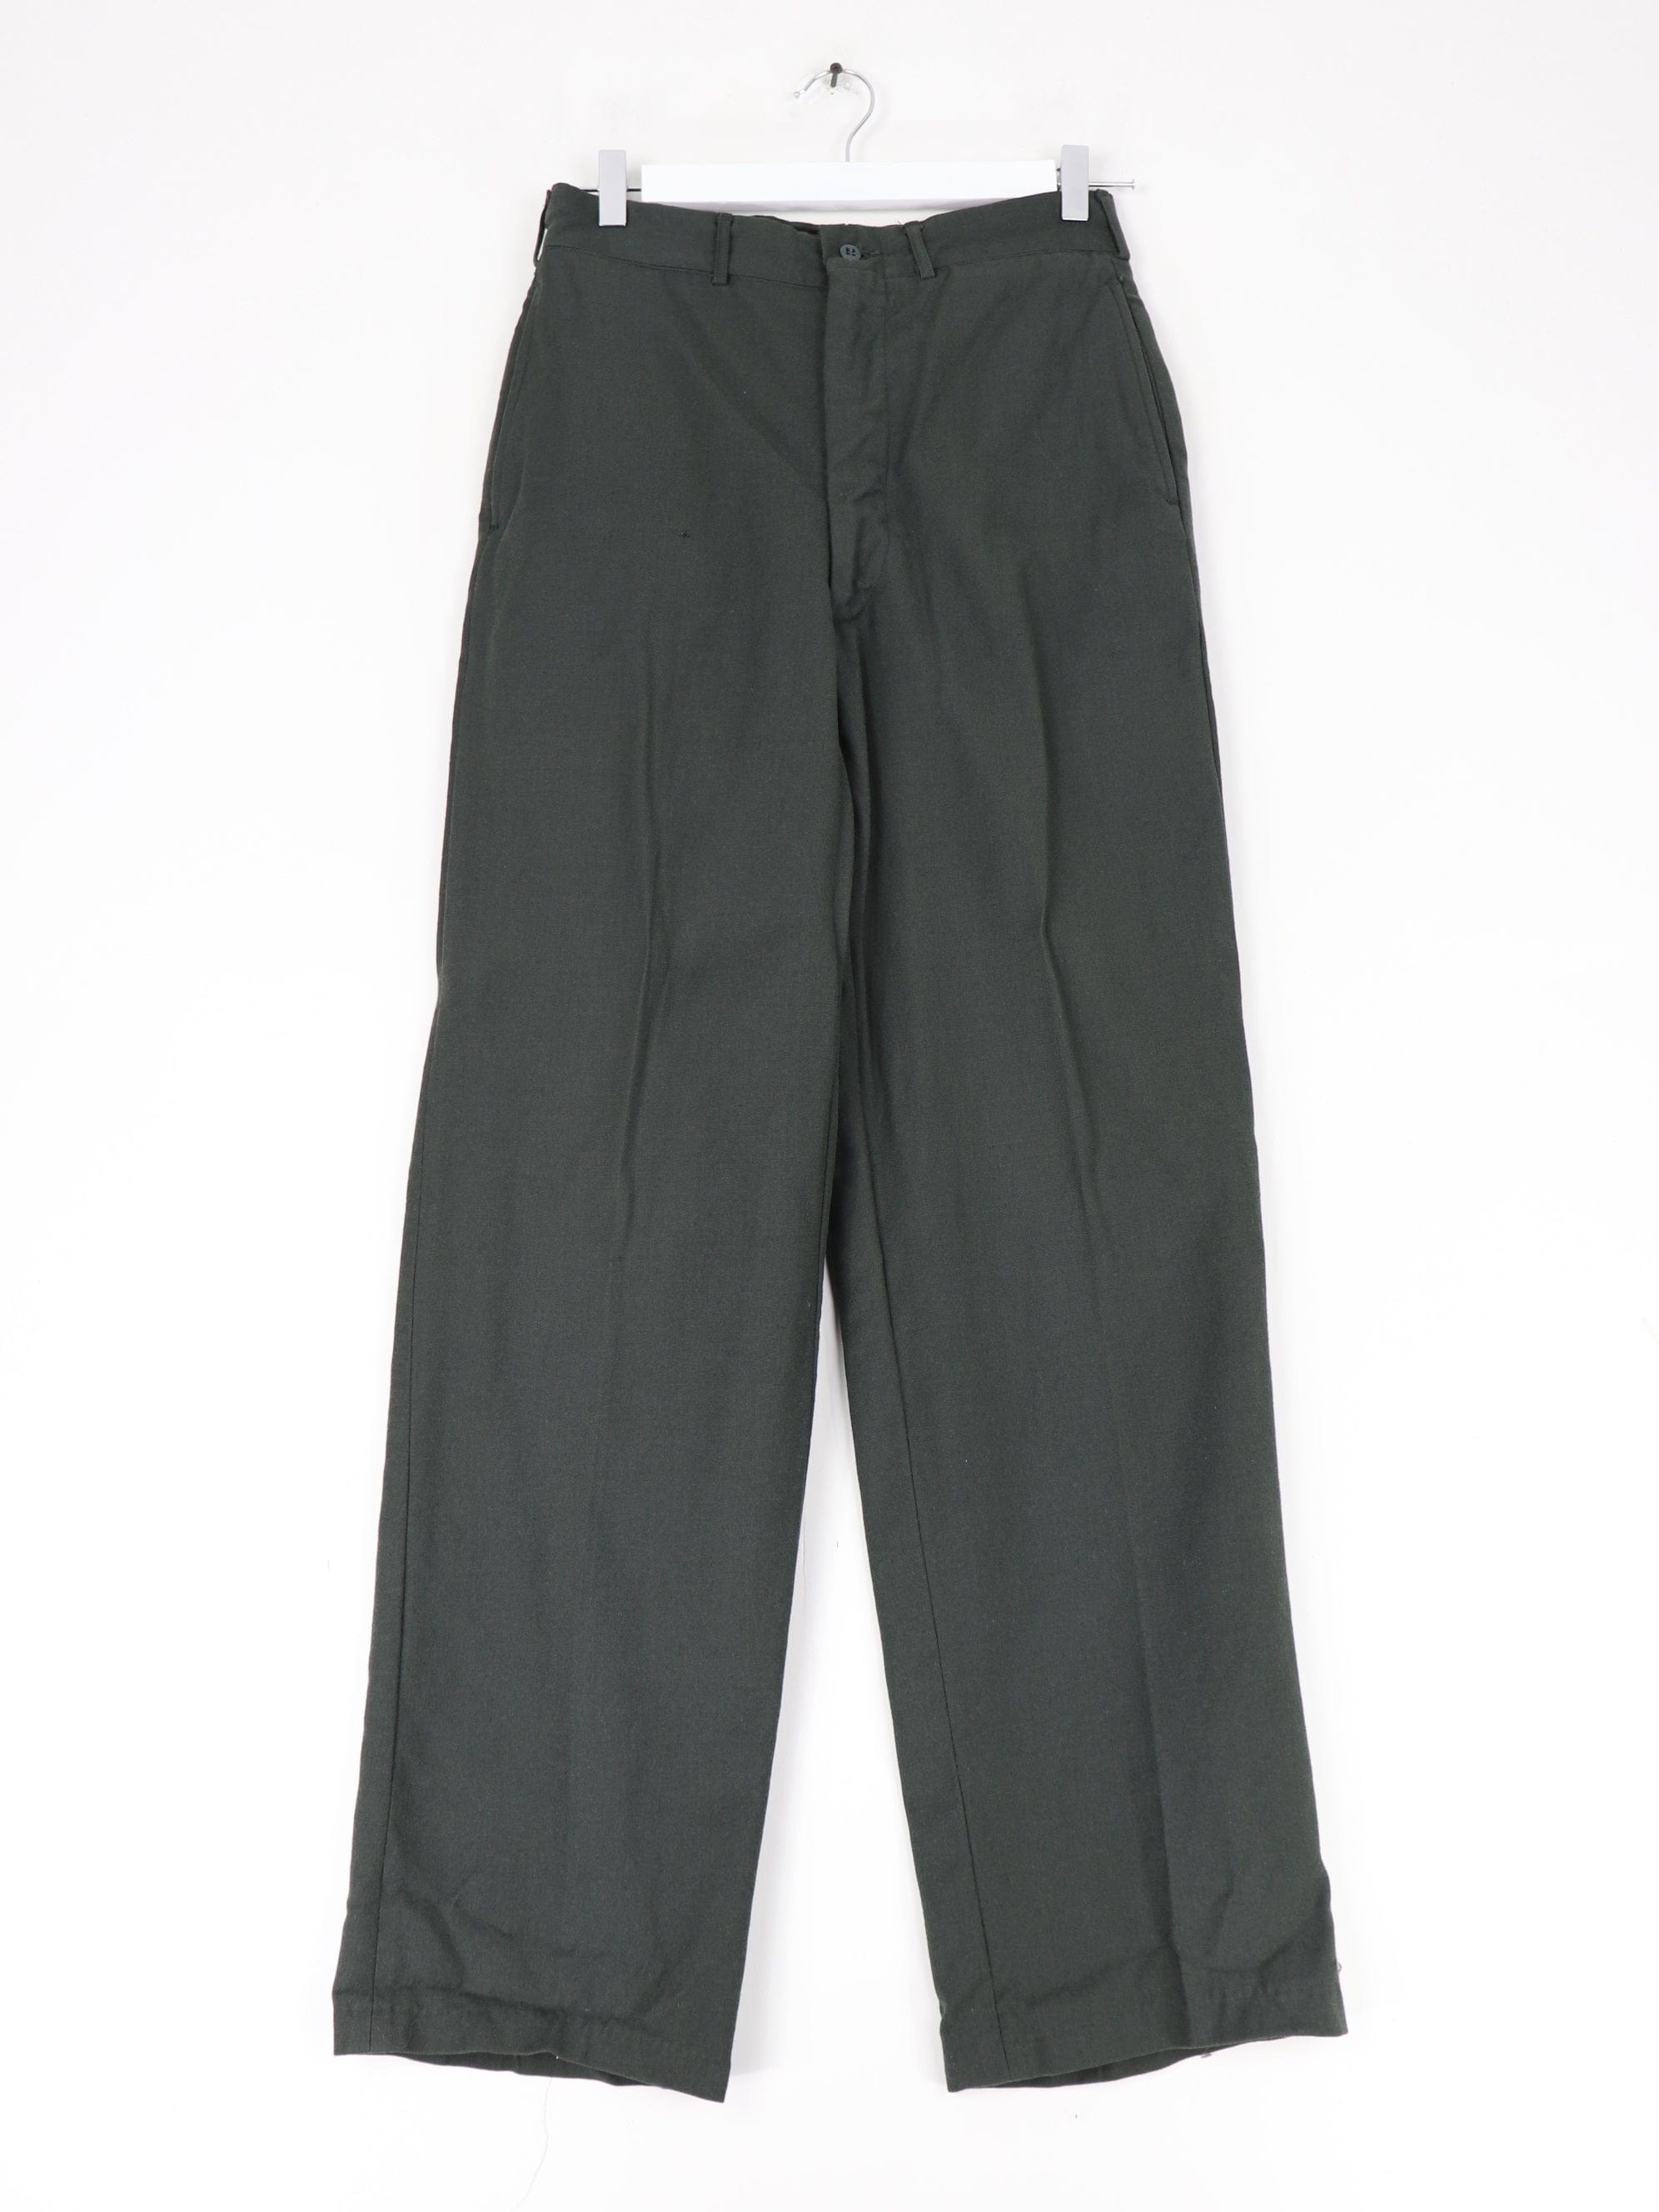 Vintage Military Pants Mens 28 x 30 Green Army Trousers Wool 70s